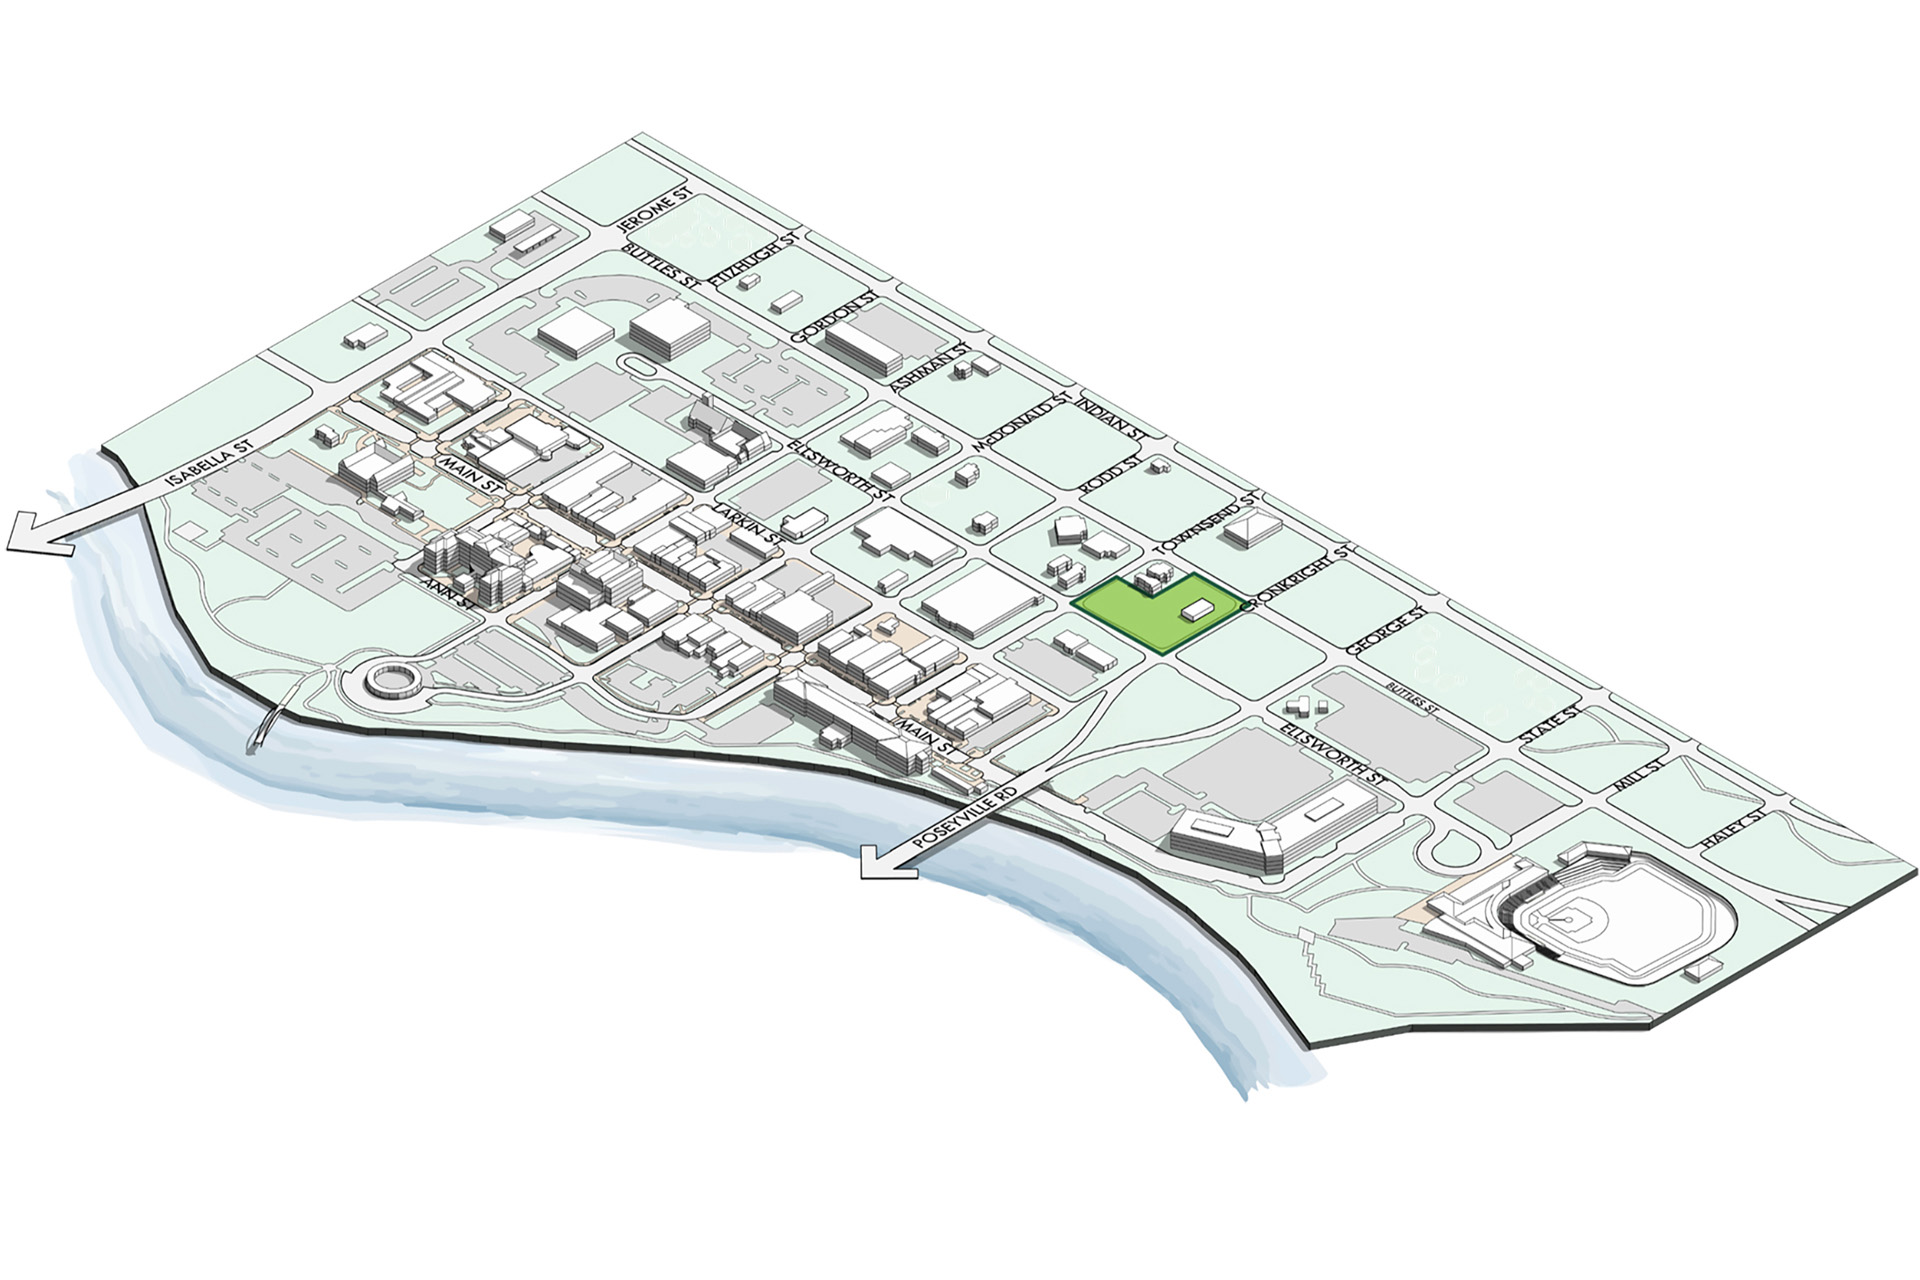 Map of Midland Center site